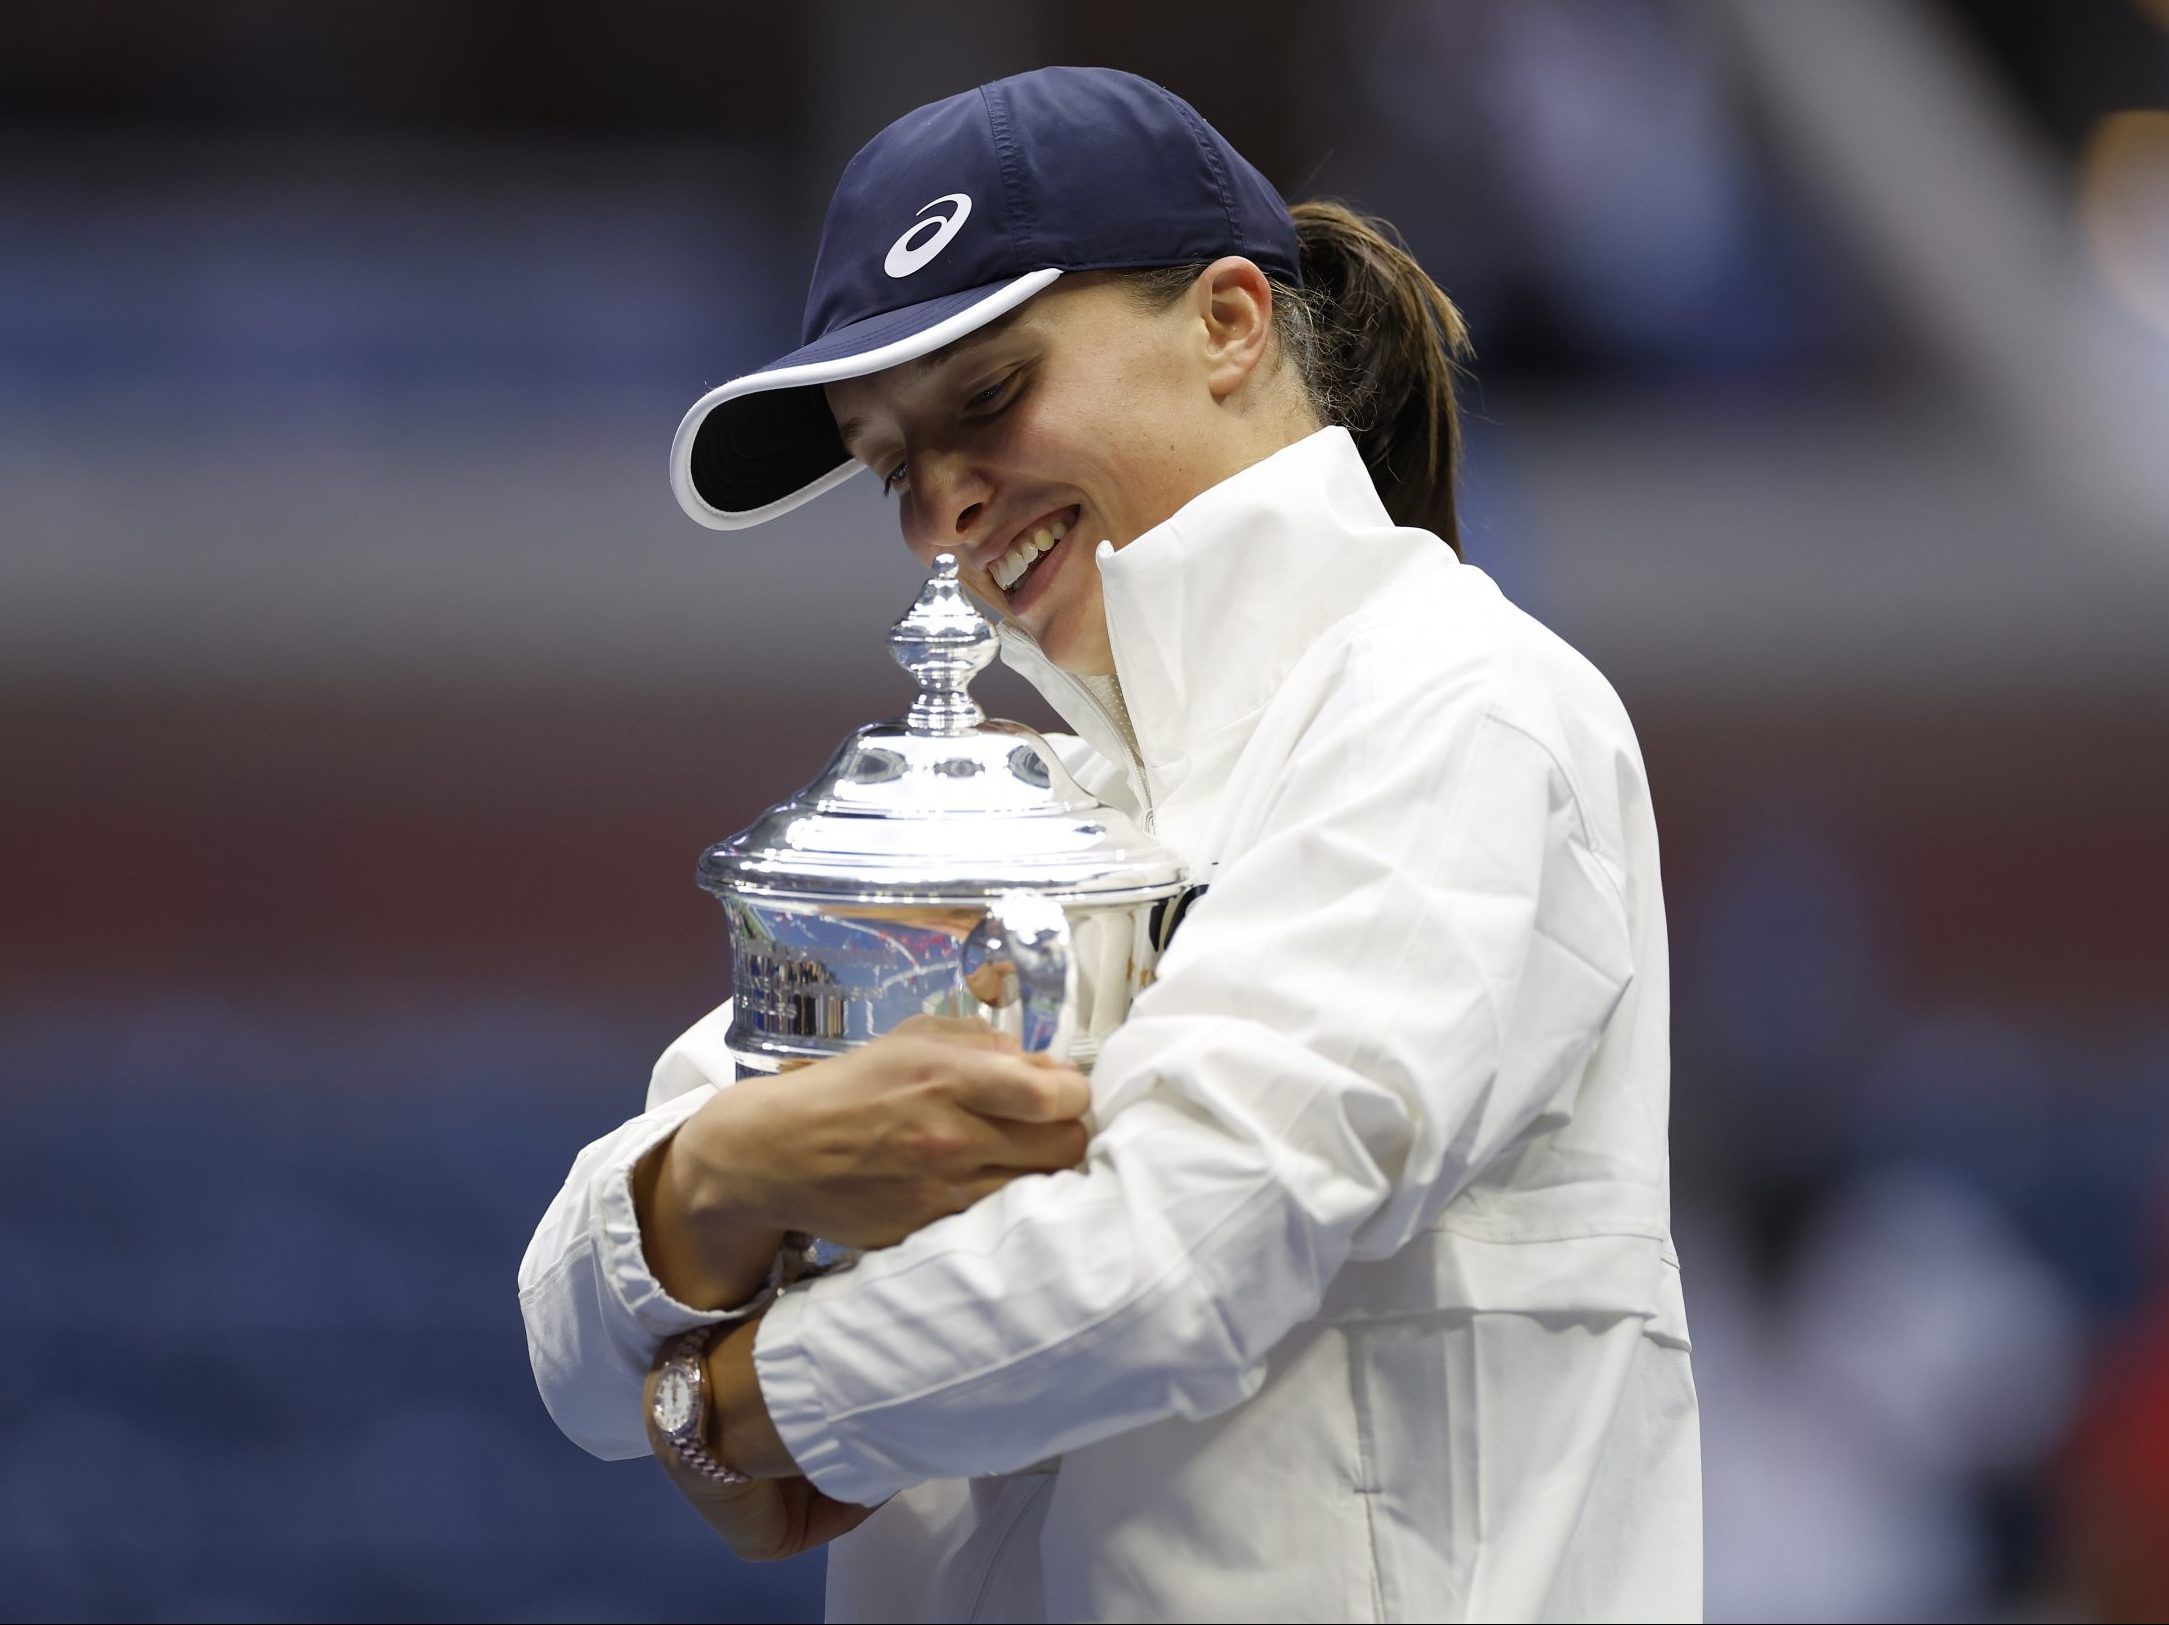 Total U.S. Open tennis prize money will hit a record 65 million